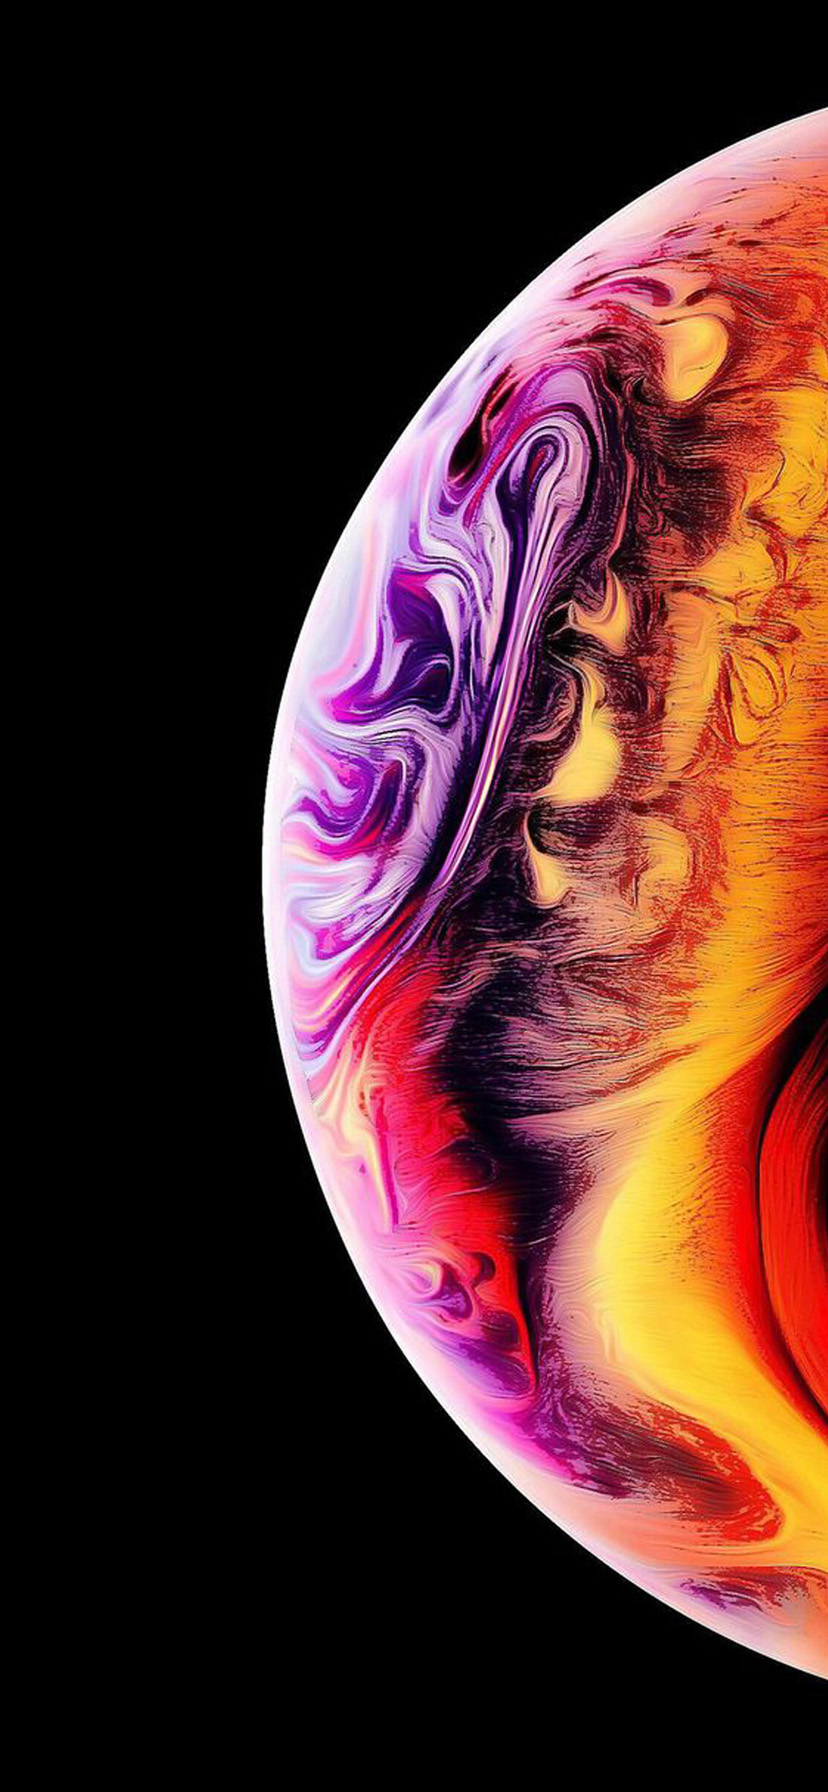 Iphone xs wallpapers hd. 🌷 Download